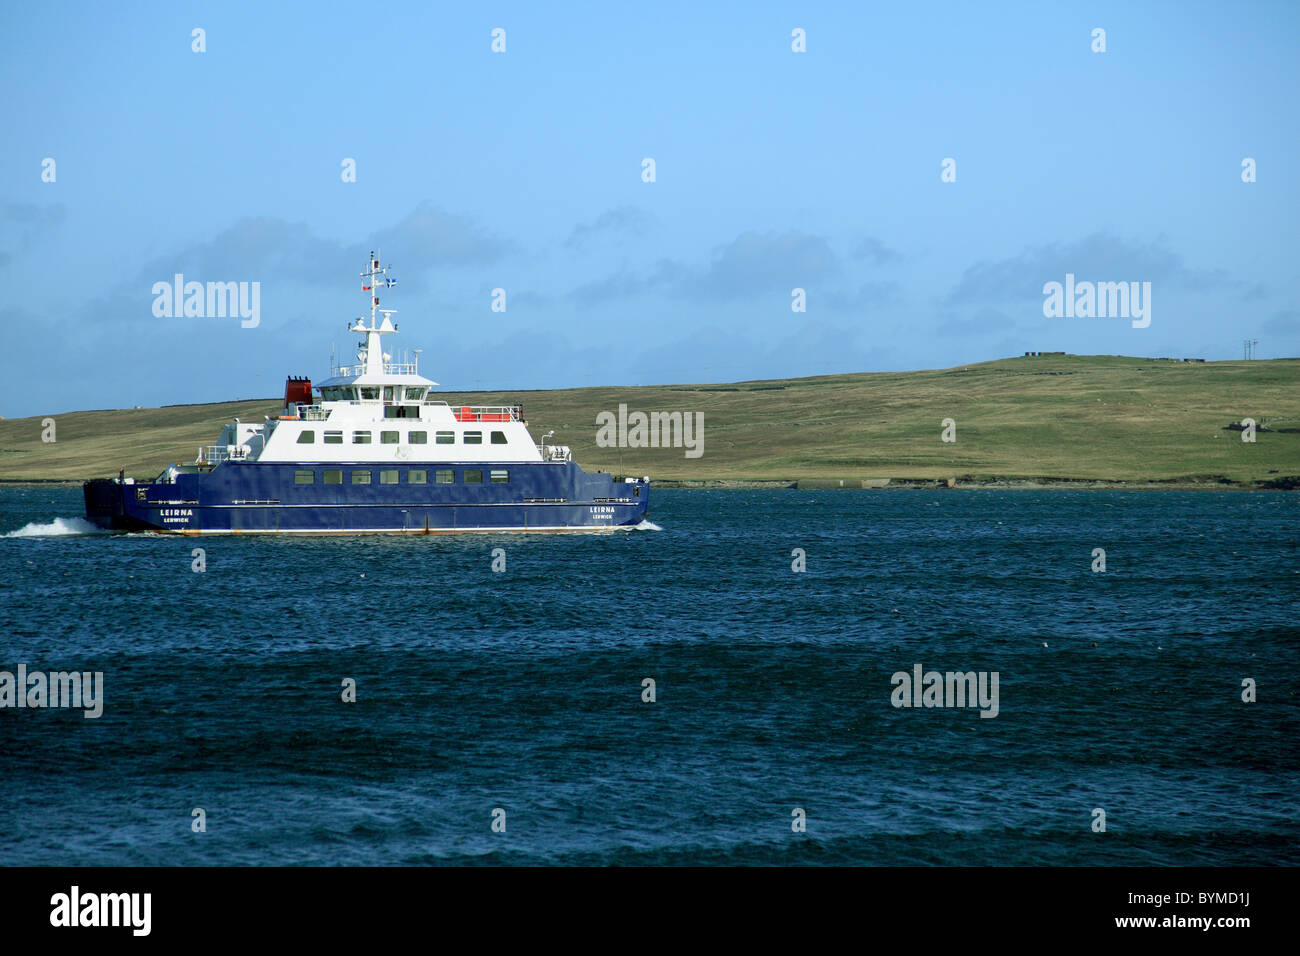 The roll on roll off car ferry, Leirna, which travels across Bressay Sound, between Bressay and Lerwick, Shetland Islands Stock Photo